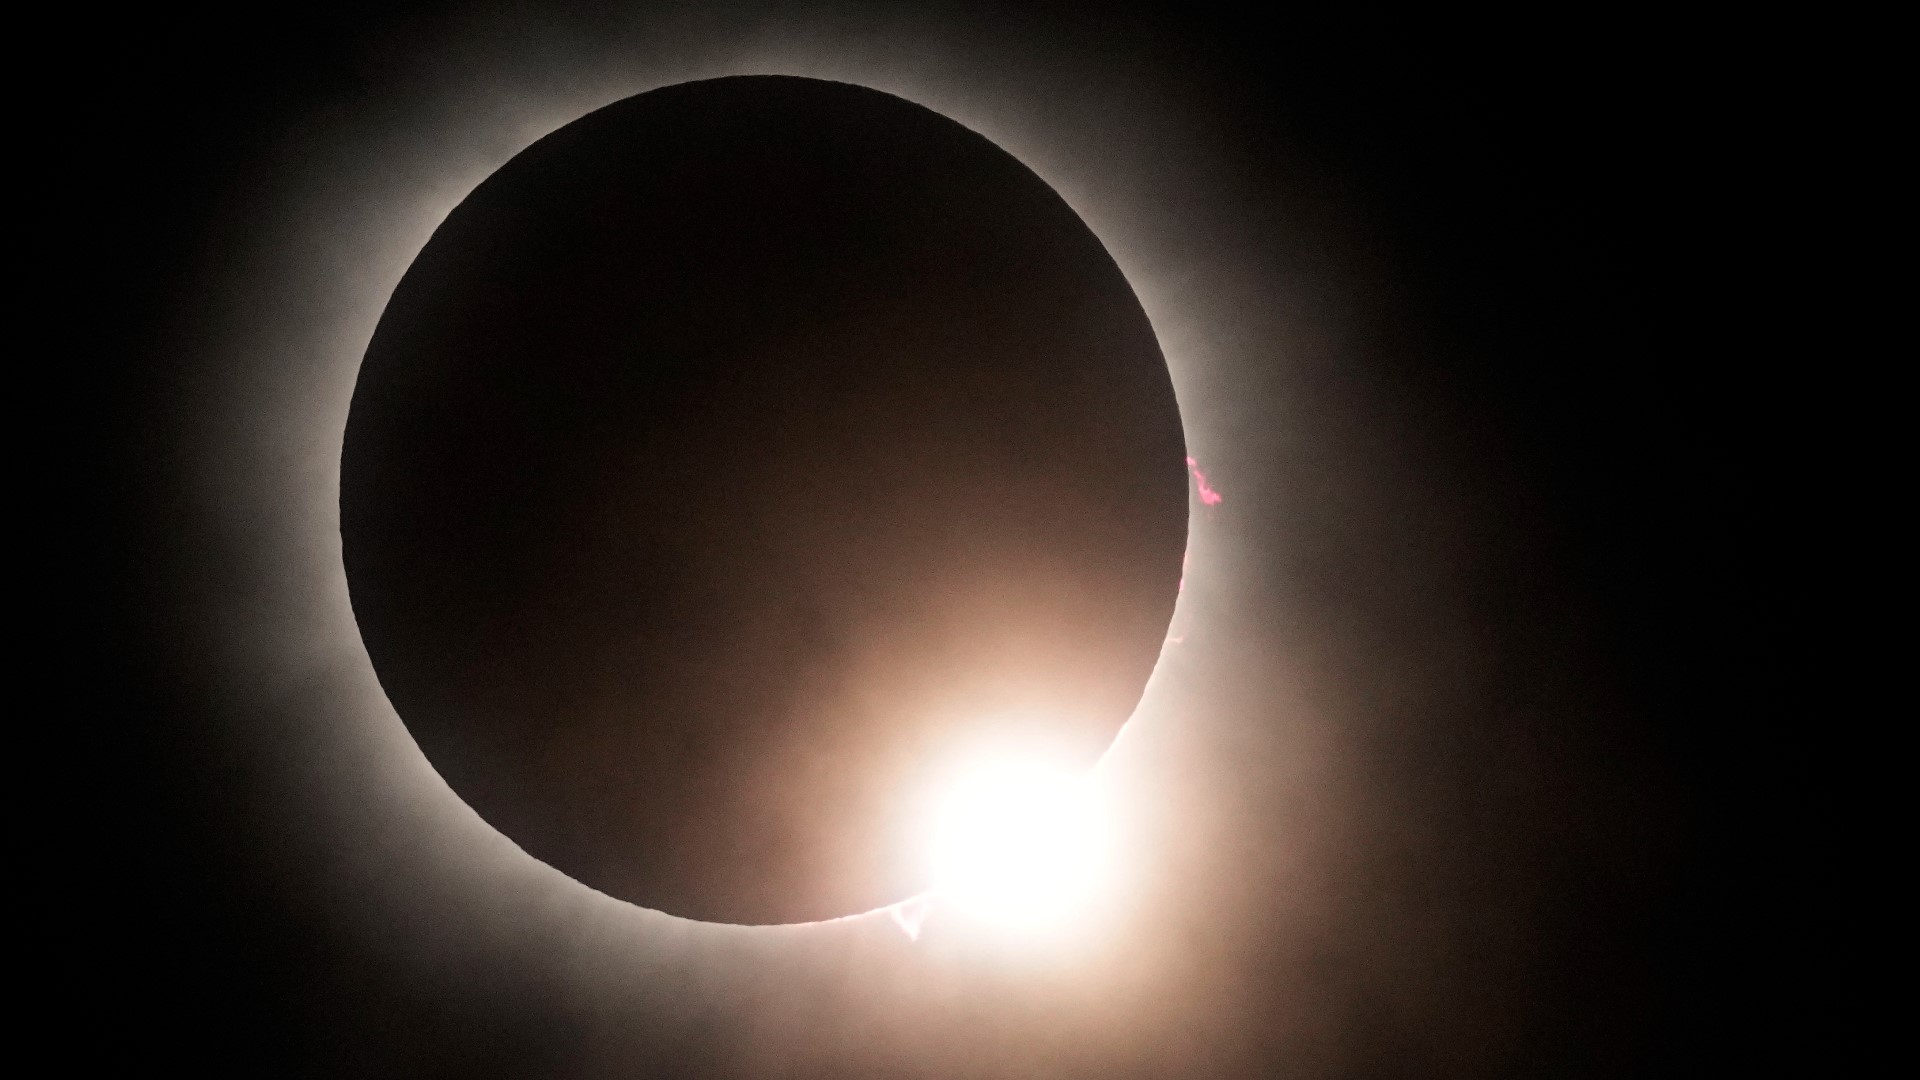 A chilly, midday darkness fell across North America on Monday as a total solar eclipse raced across the continent